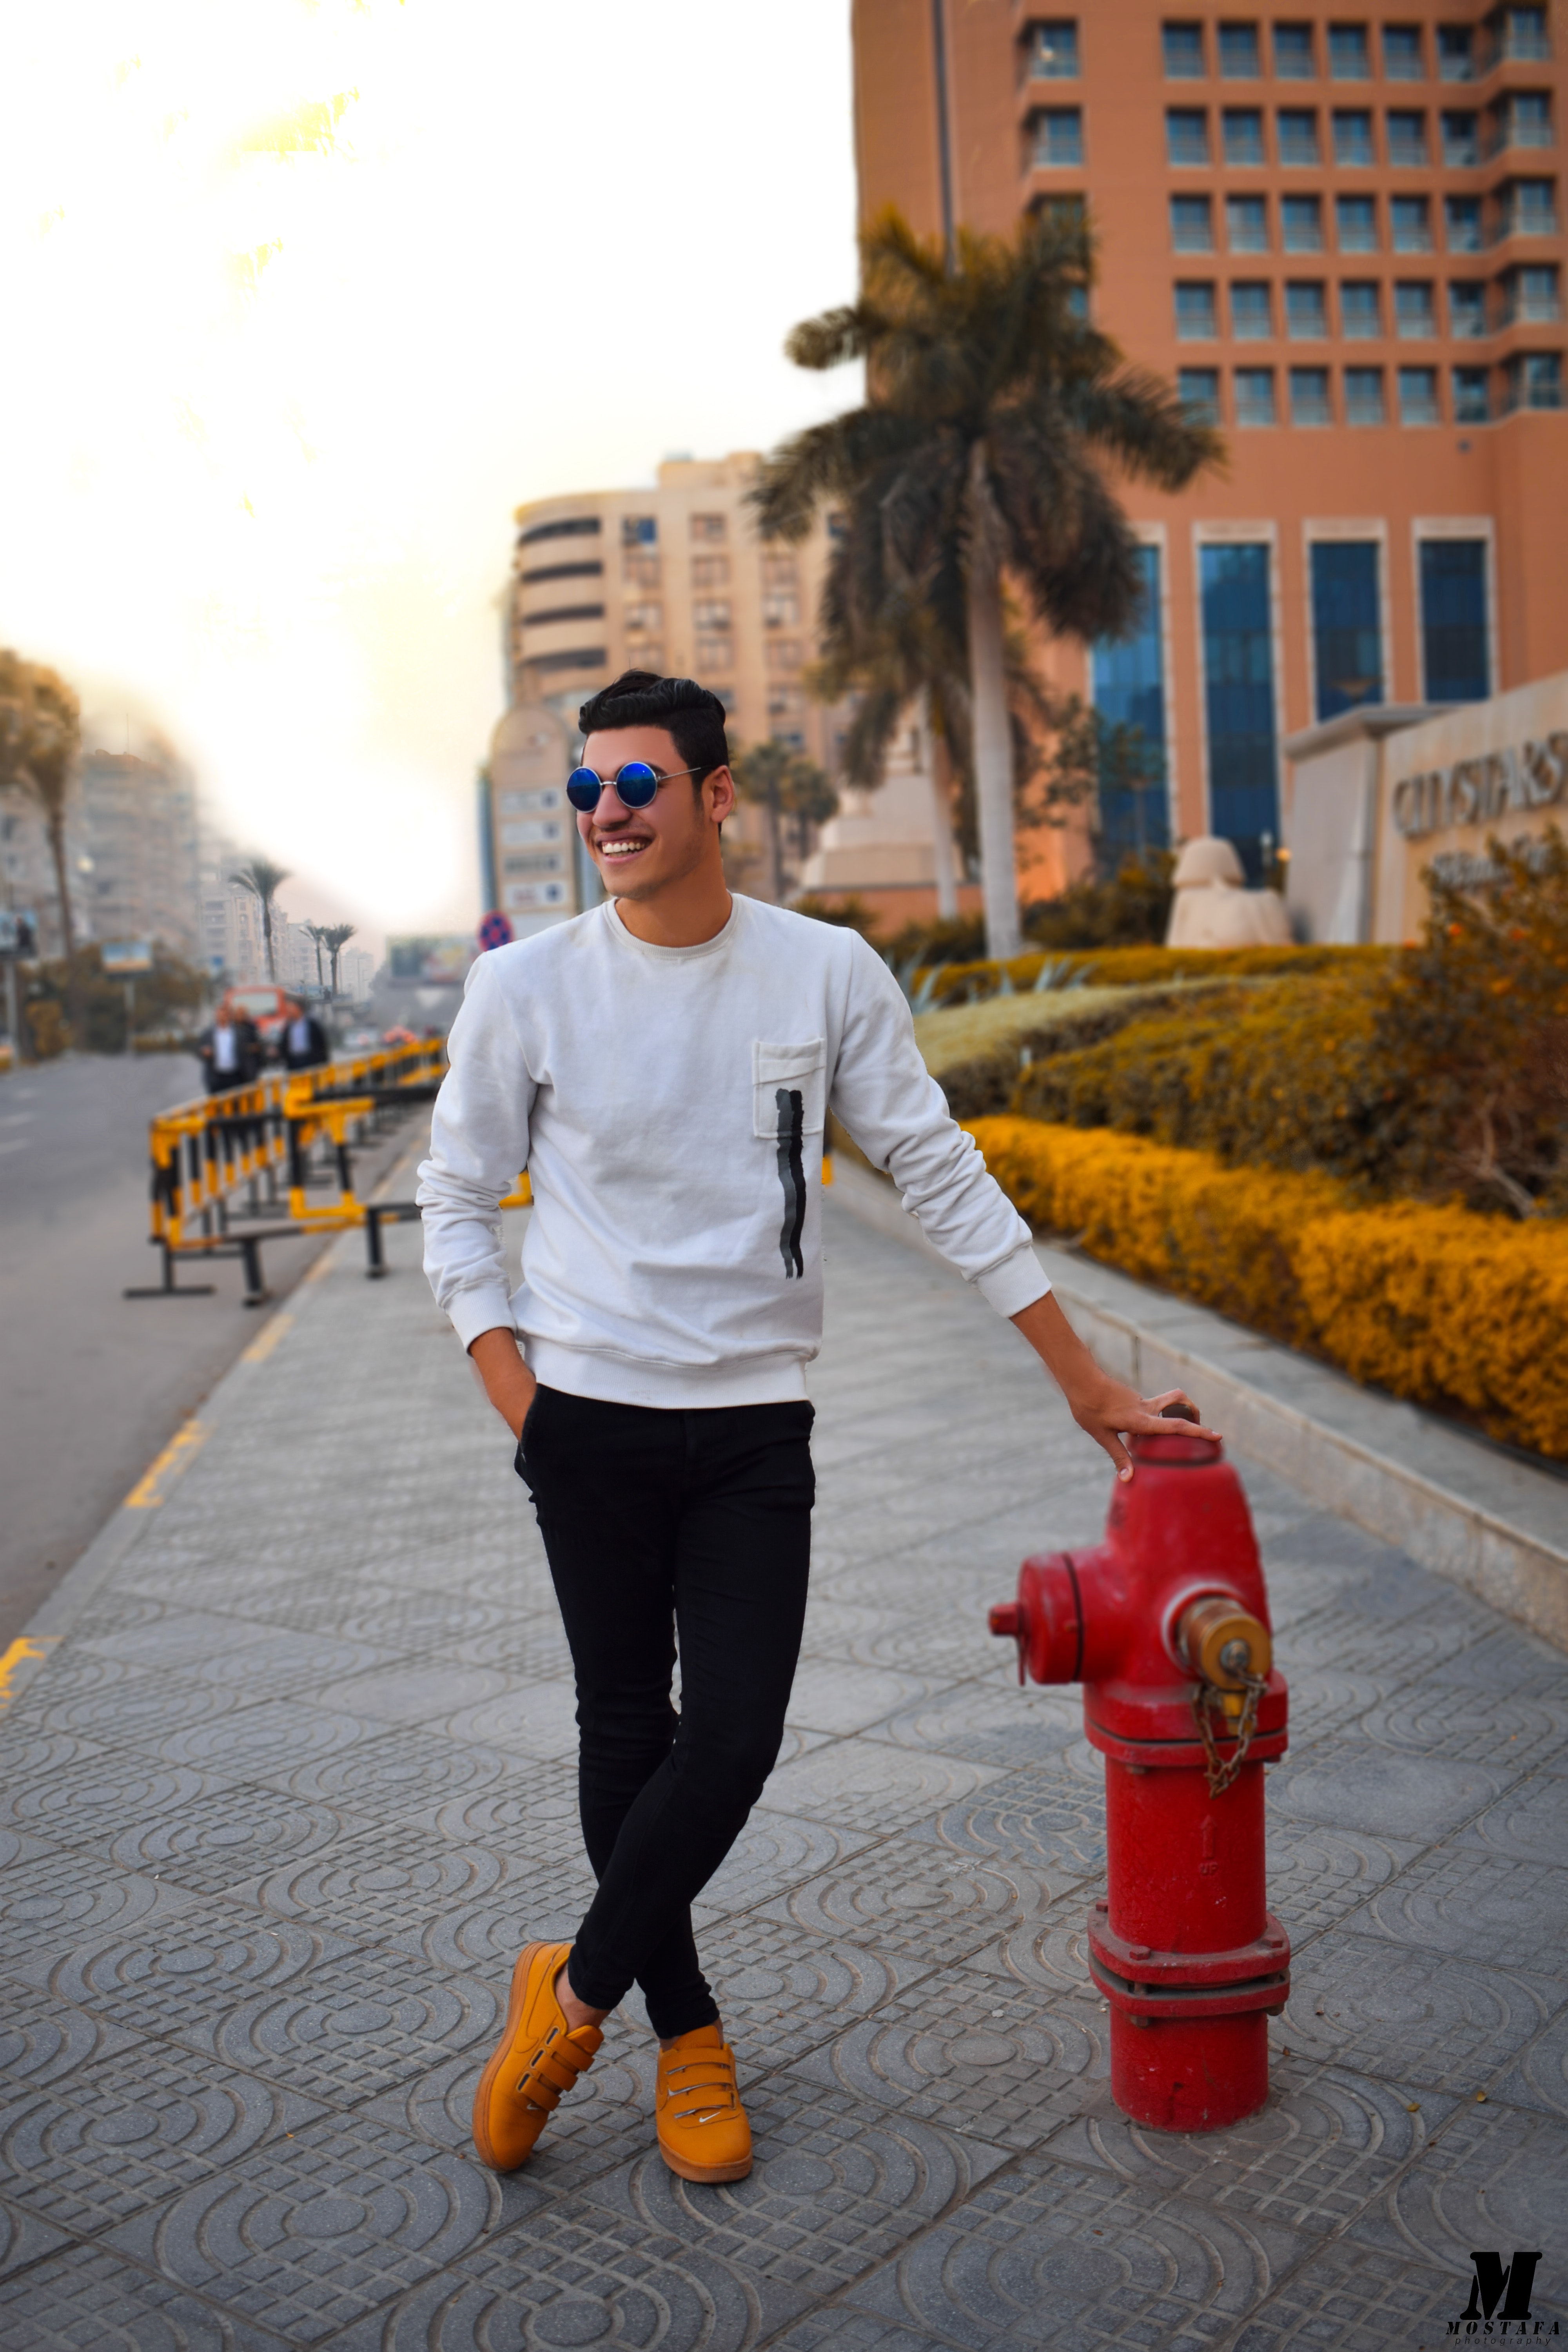 Man in White Long-sleeved Shirt Holding Red Fire Hydrant, Buildings, Person, Urban, Sunglasses, HQ Photo